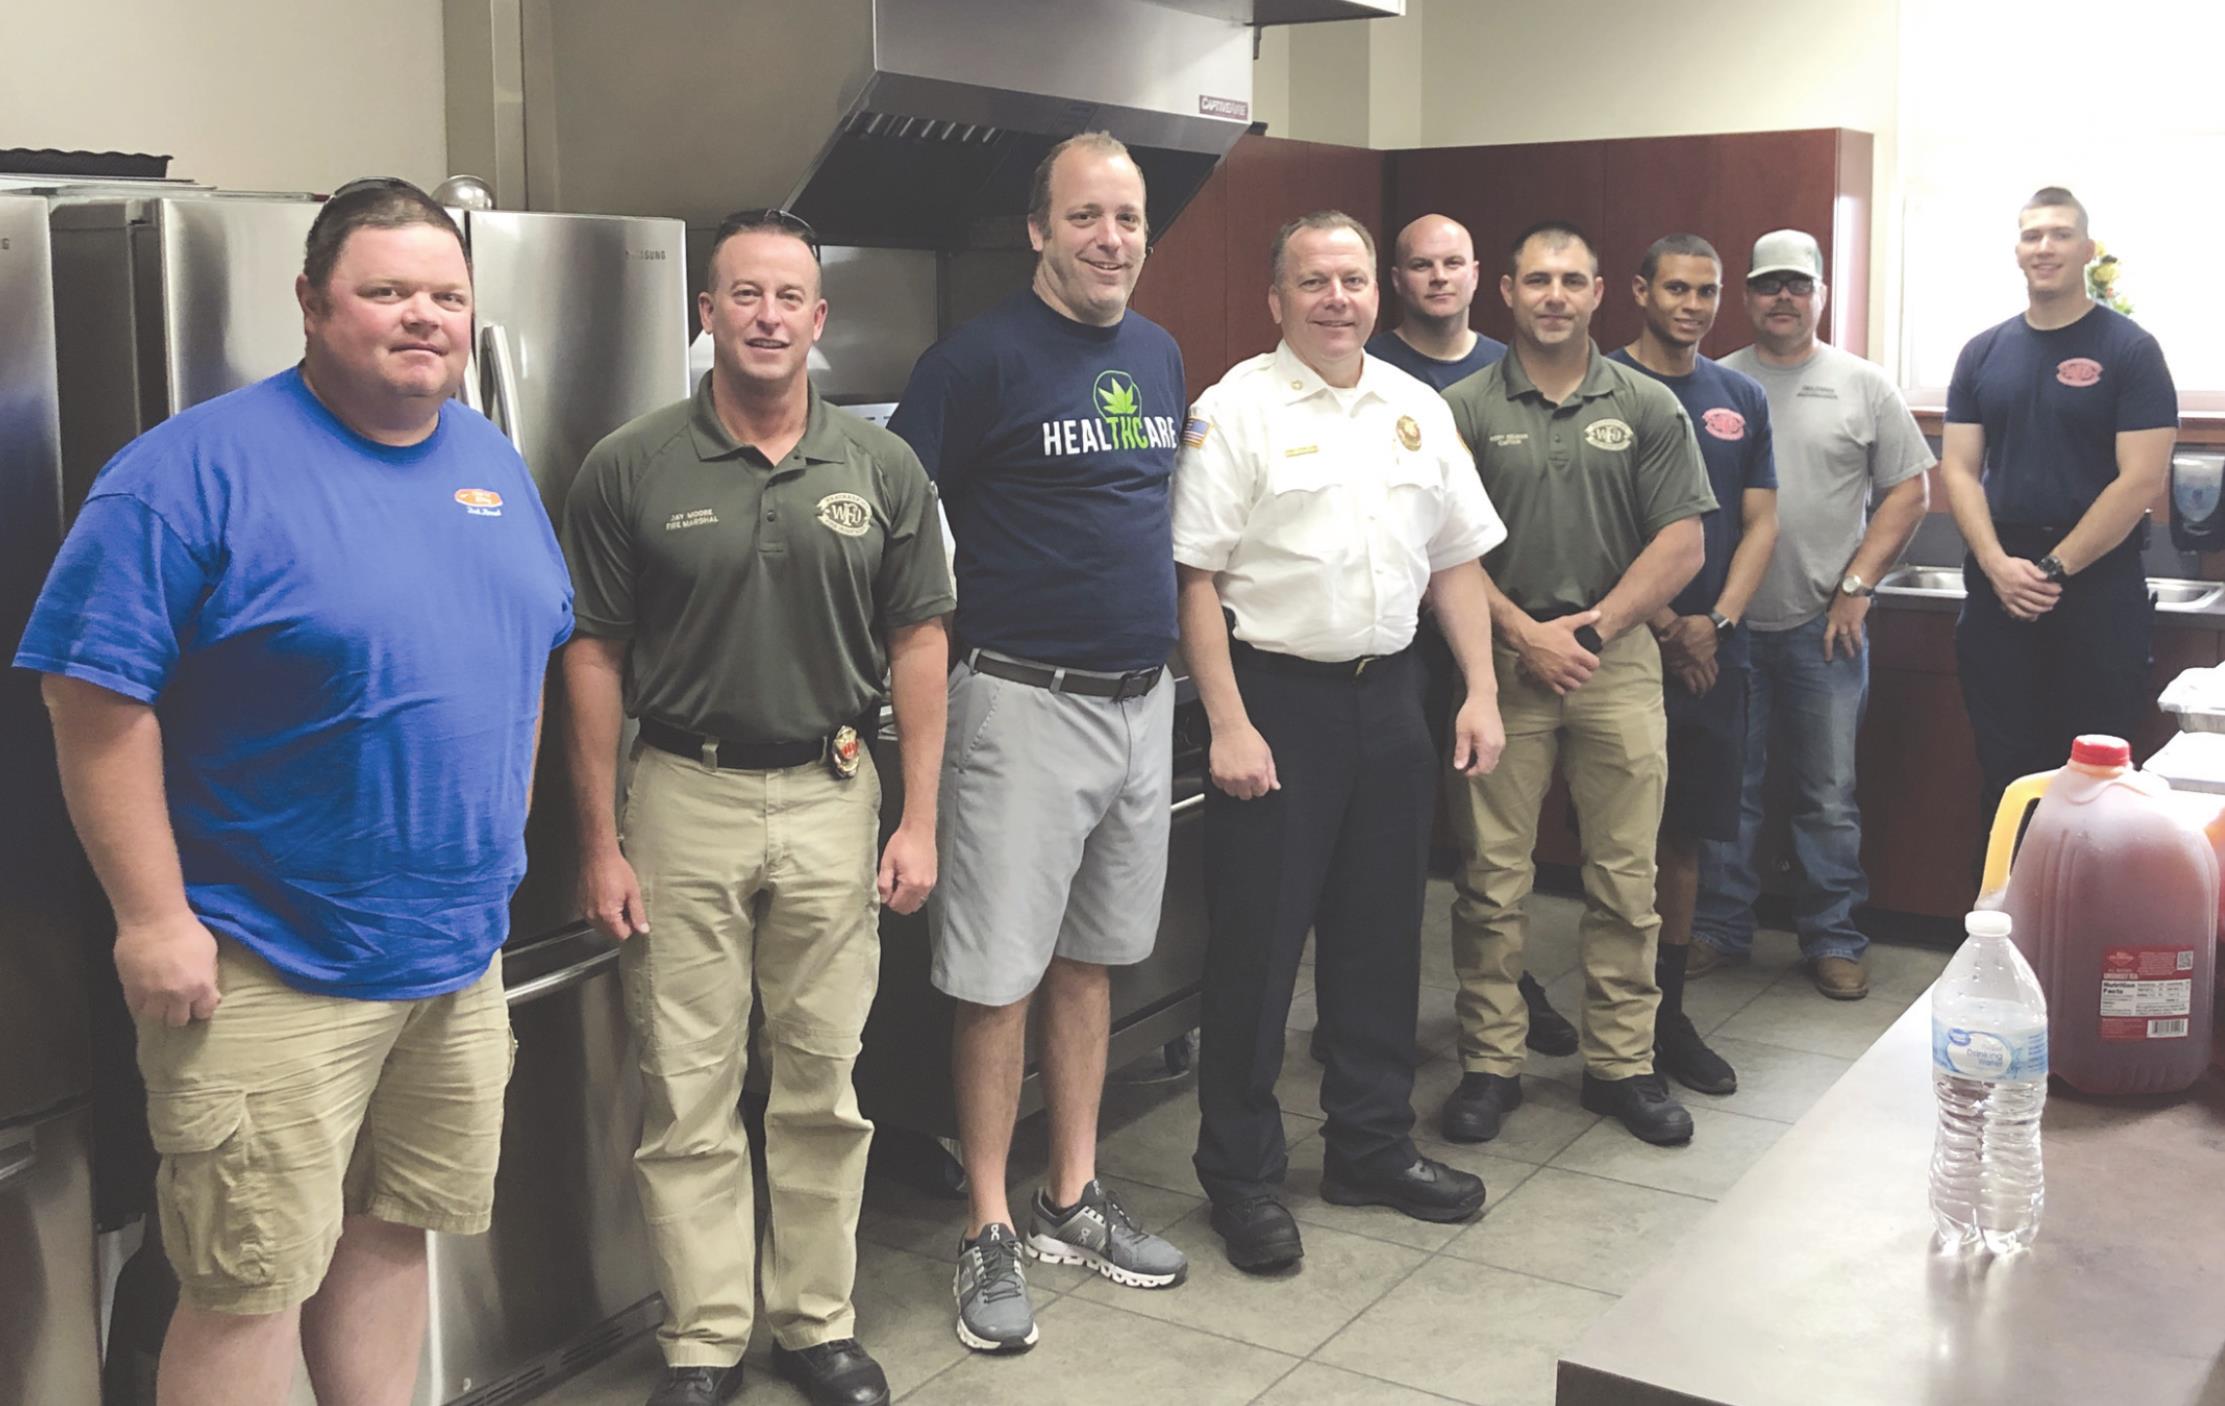 Provided Local businesses, The Wellness Joint and Growing Wellness, provided free meals to the Weatherford Fire Department earlier this week to say “thank you” for their work during COVID-19.